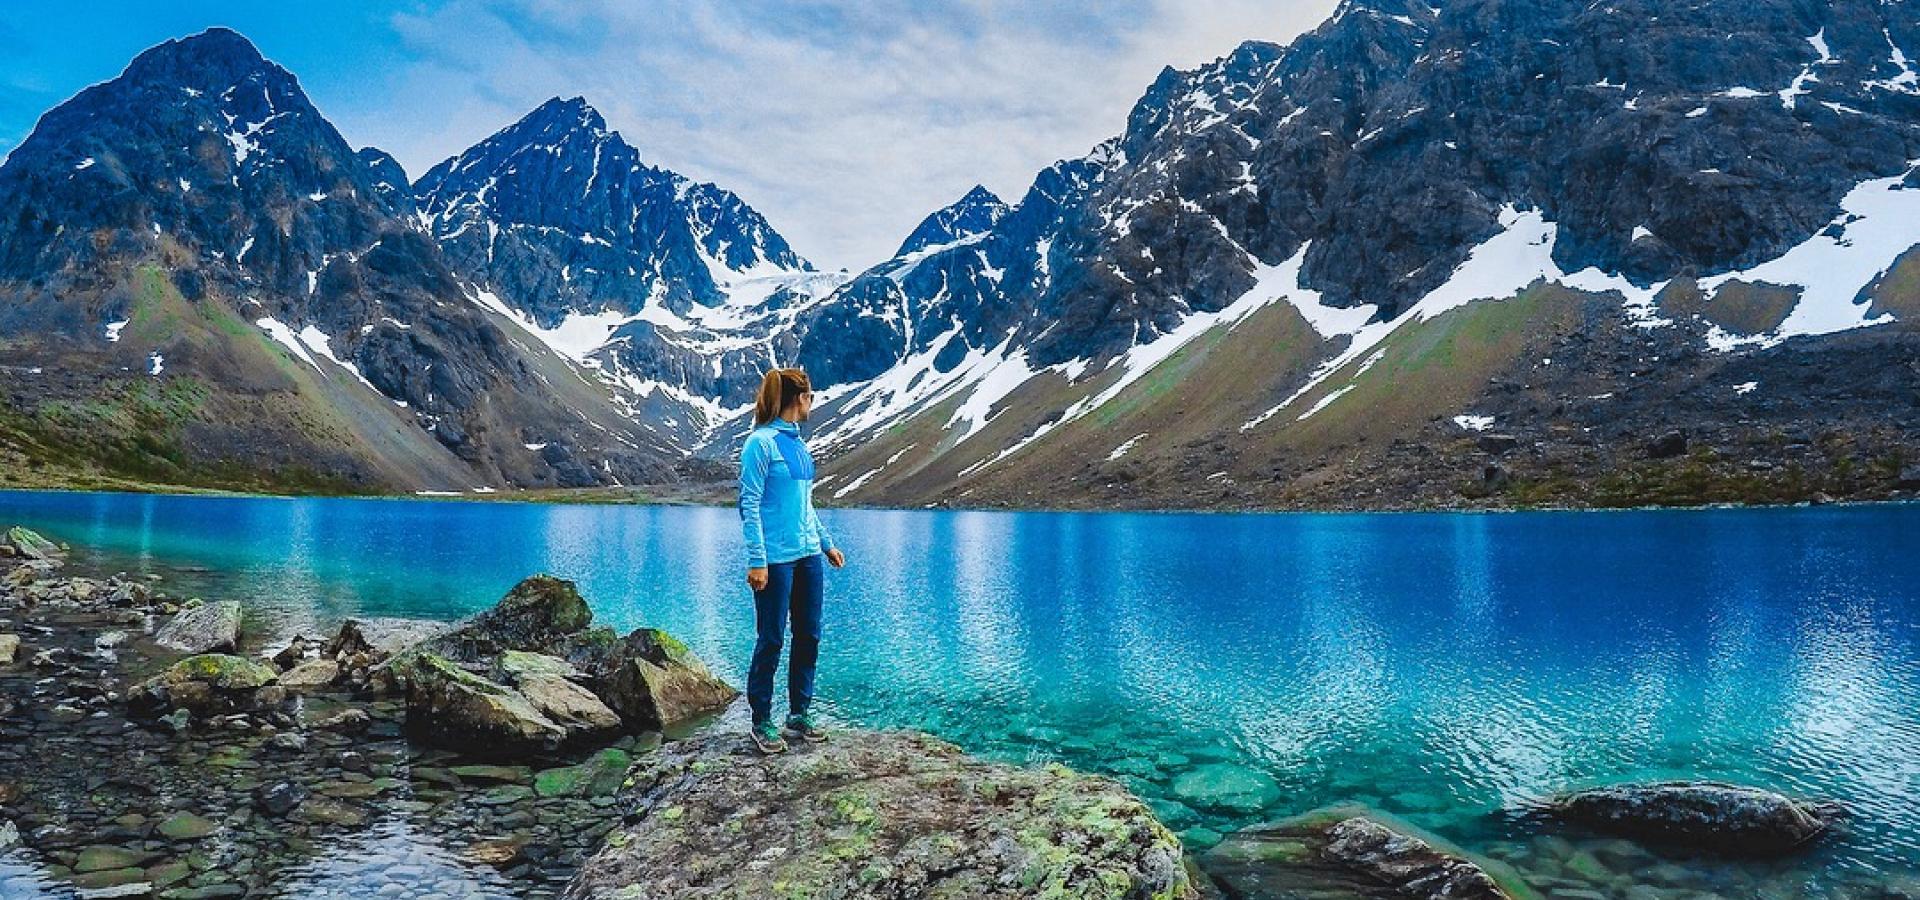 Standing by the Blue lake, enjoying the view of the lake and the Lyngen Alps